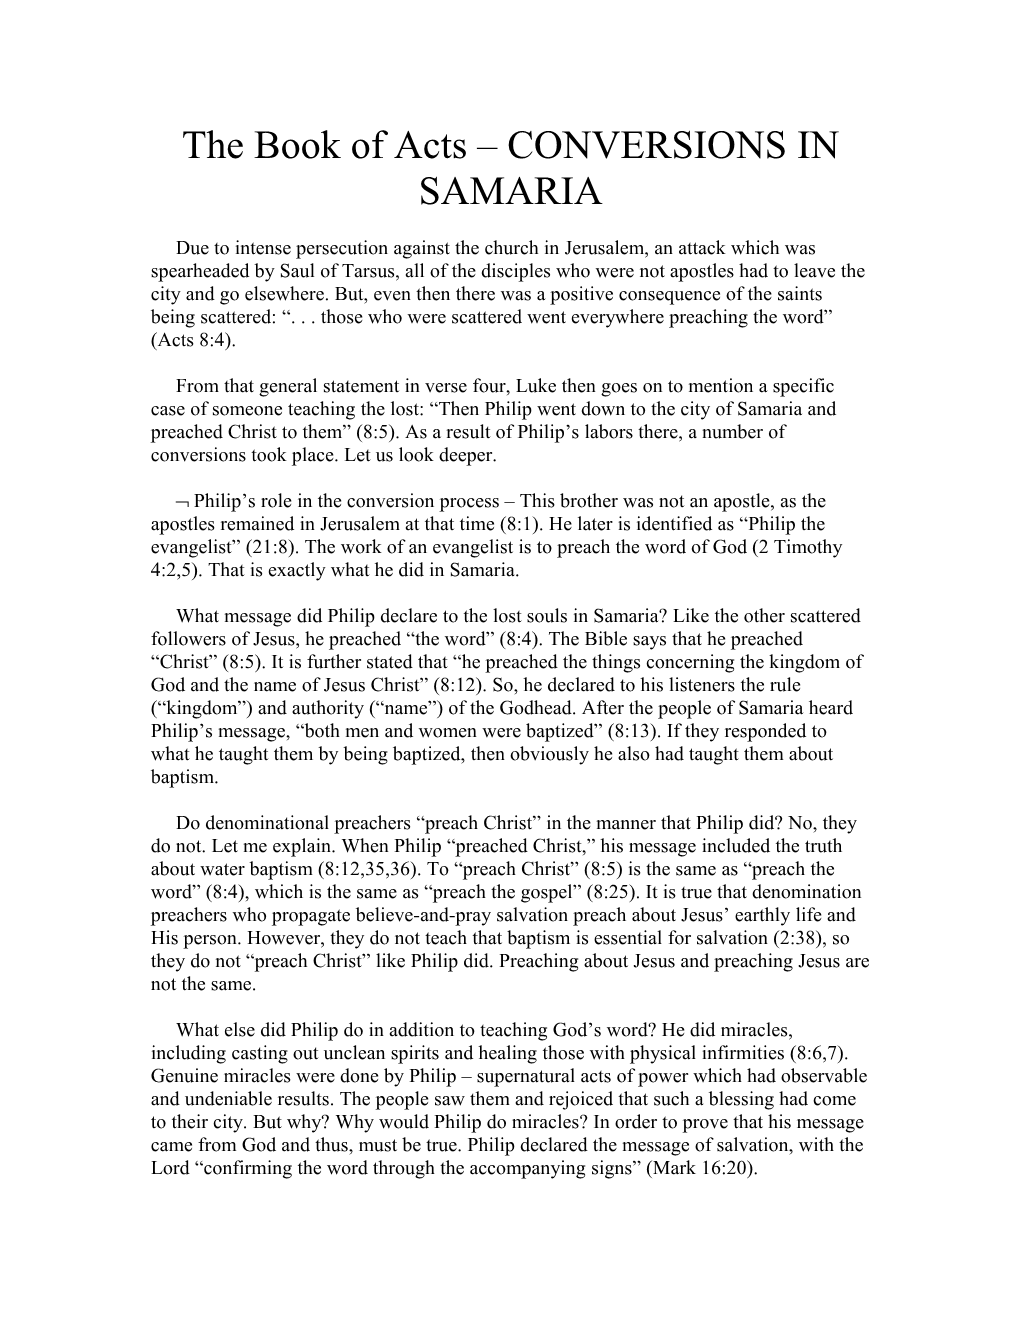 The Book of Acts CONVERSIONS in SAMARIA